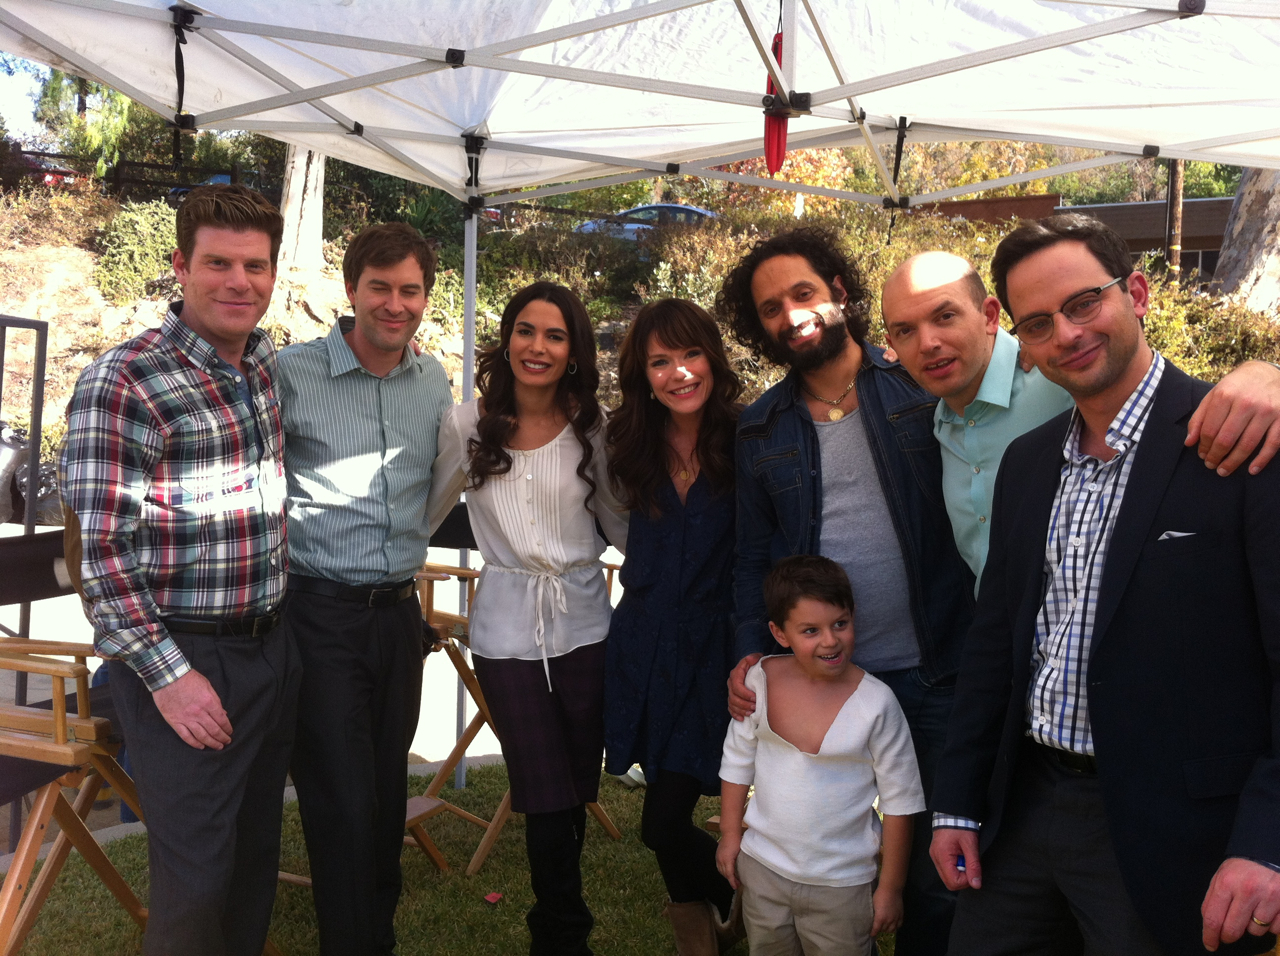 Adam and the cast of The League